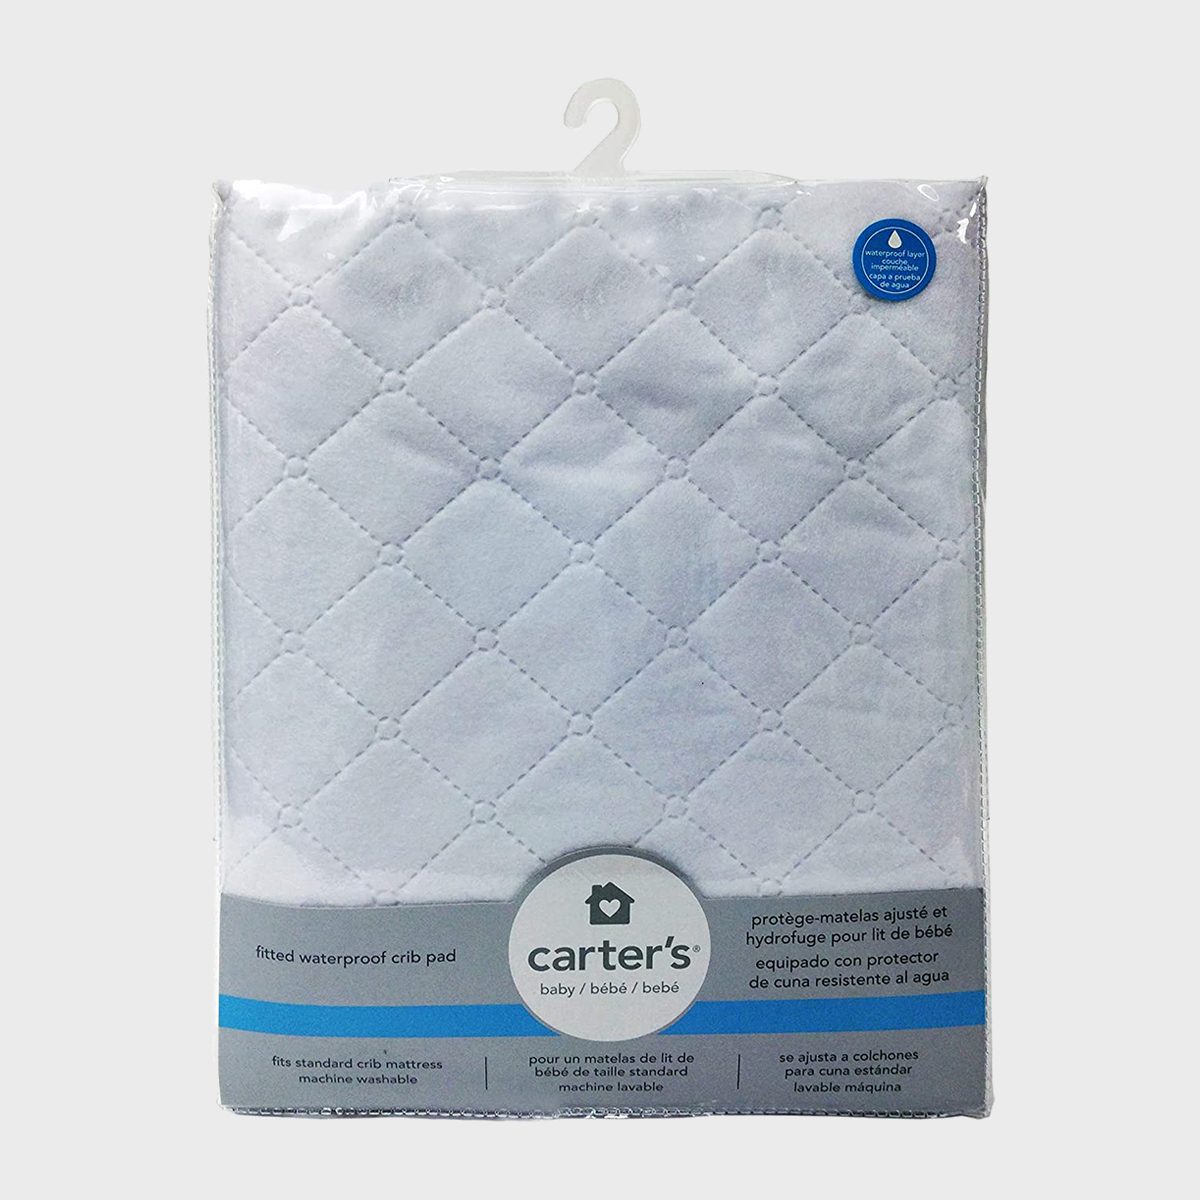 Carter's Waterproof Fitted Crib Toddler Mattress Protector